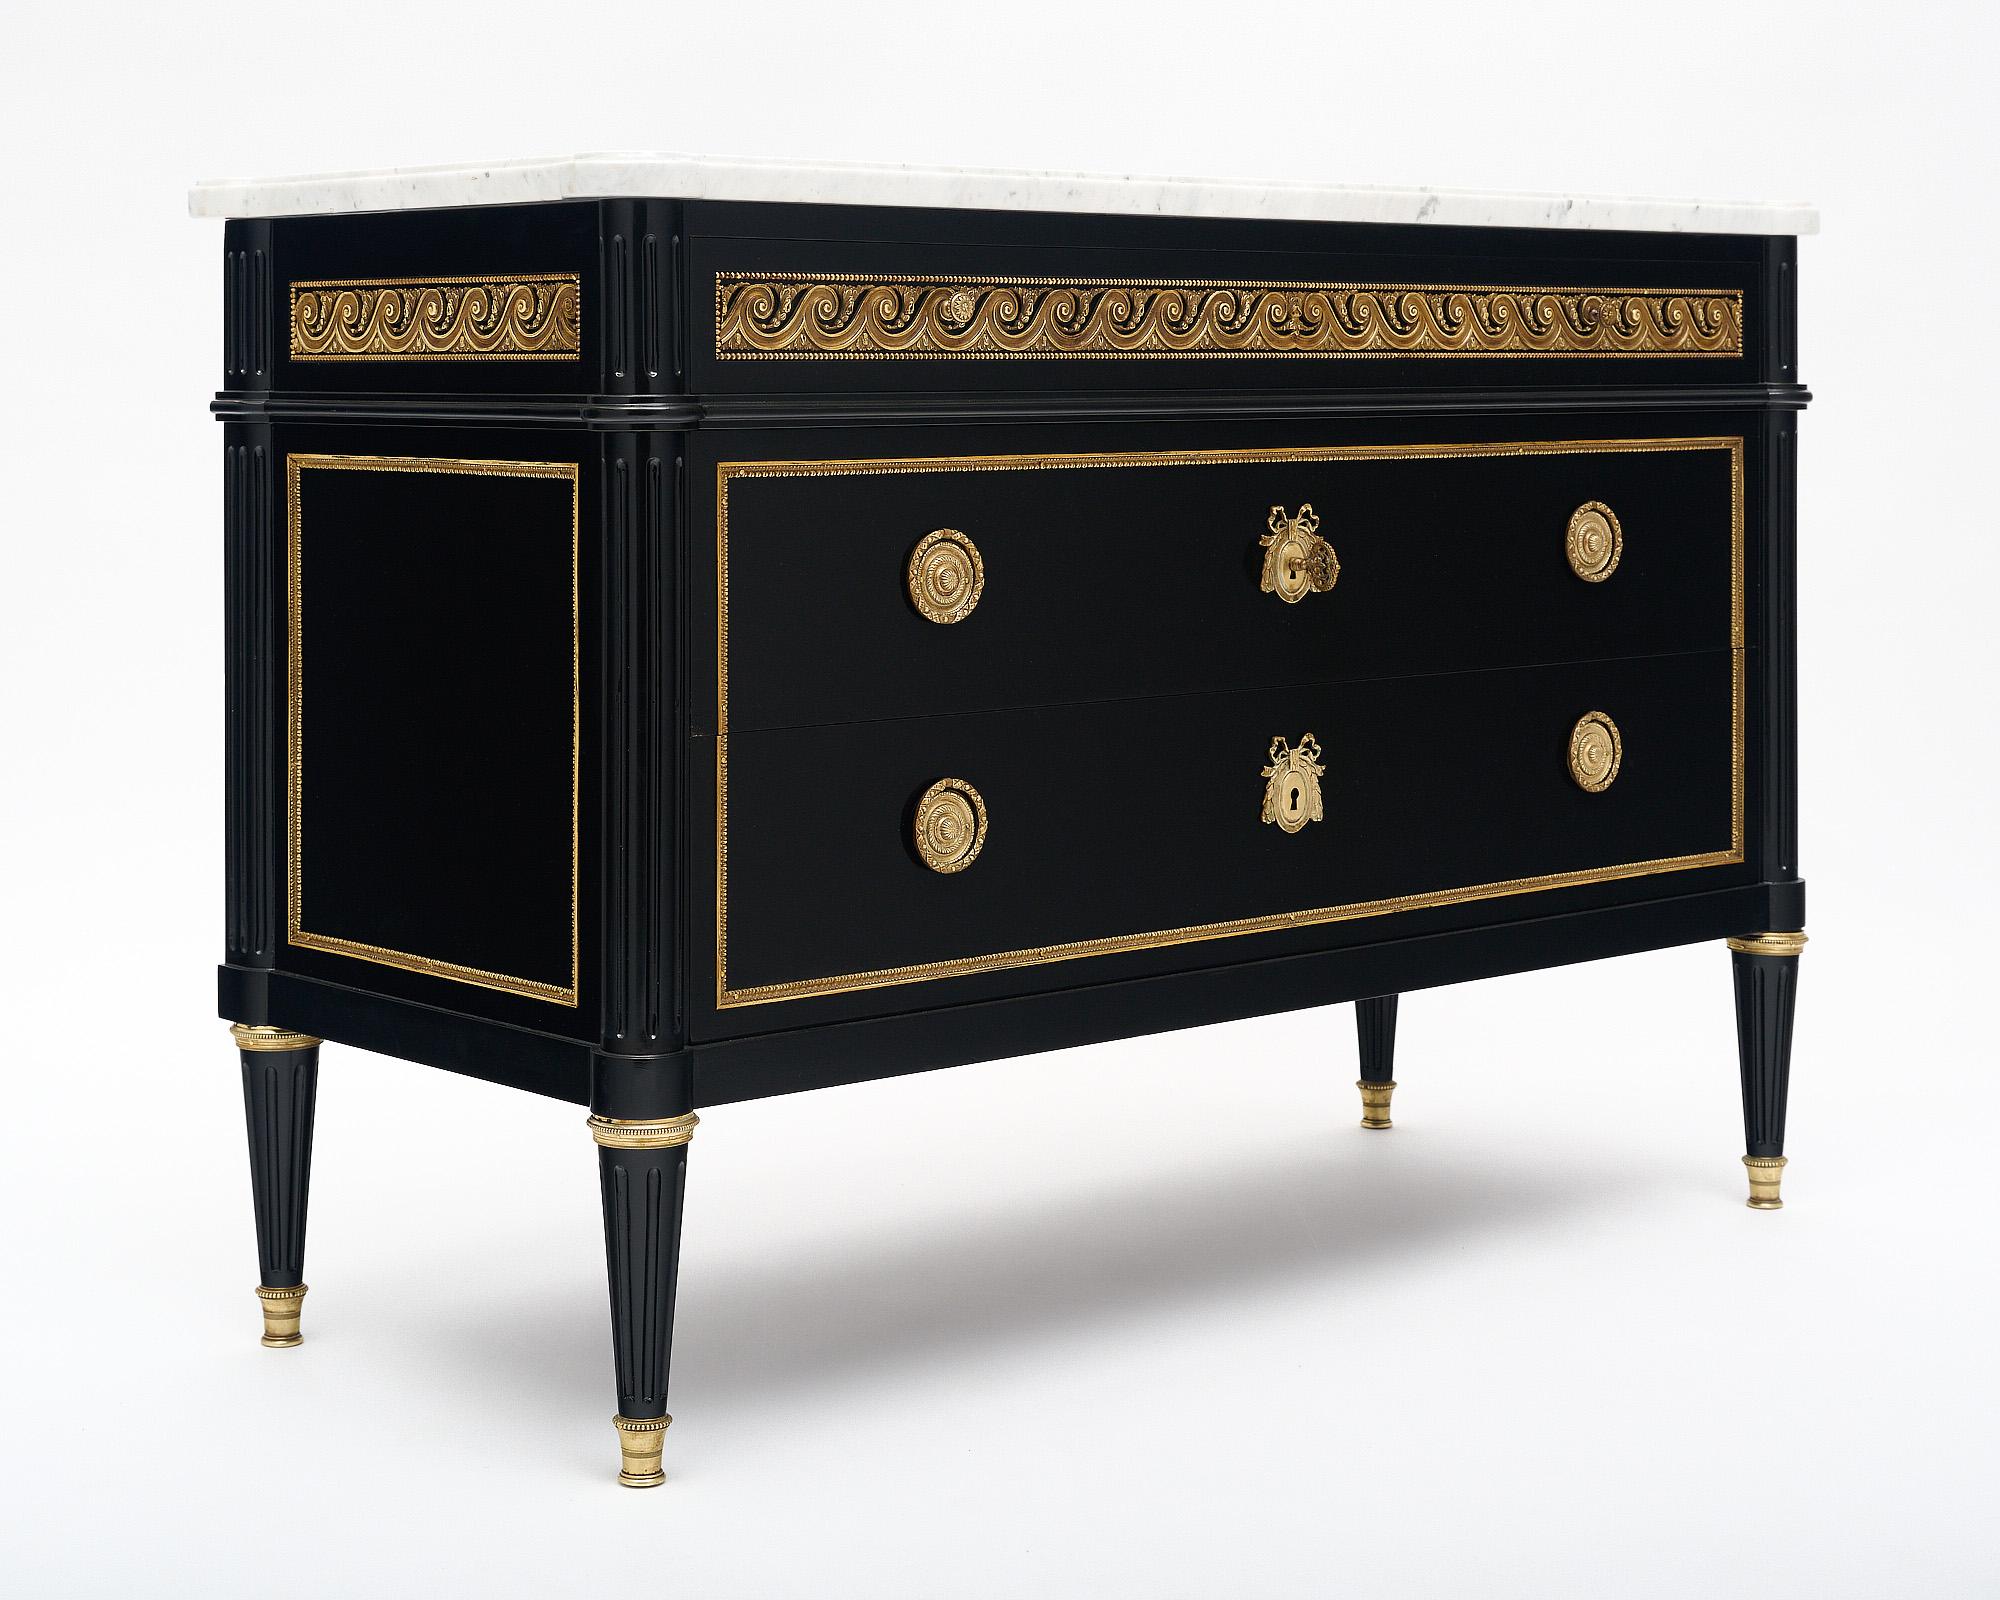 Chest of drawers; French; in the Louis XVI Style. This striking piece features three dovetailed drawers and is made of ebonized Mahogany that has been finished with a lustrous museum quality French polish. There is gilt brass trim and detailed